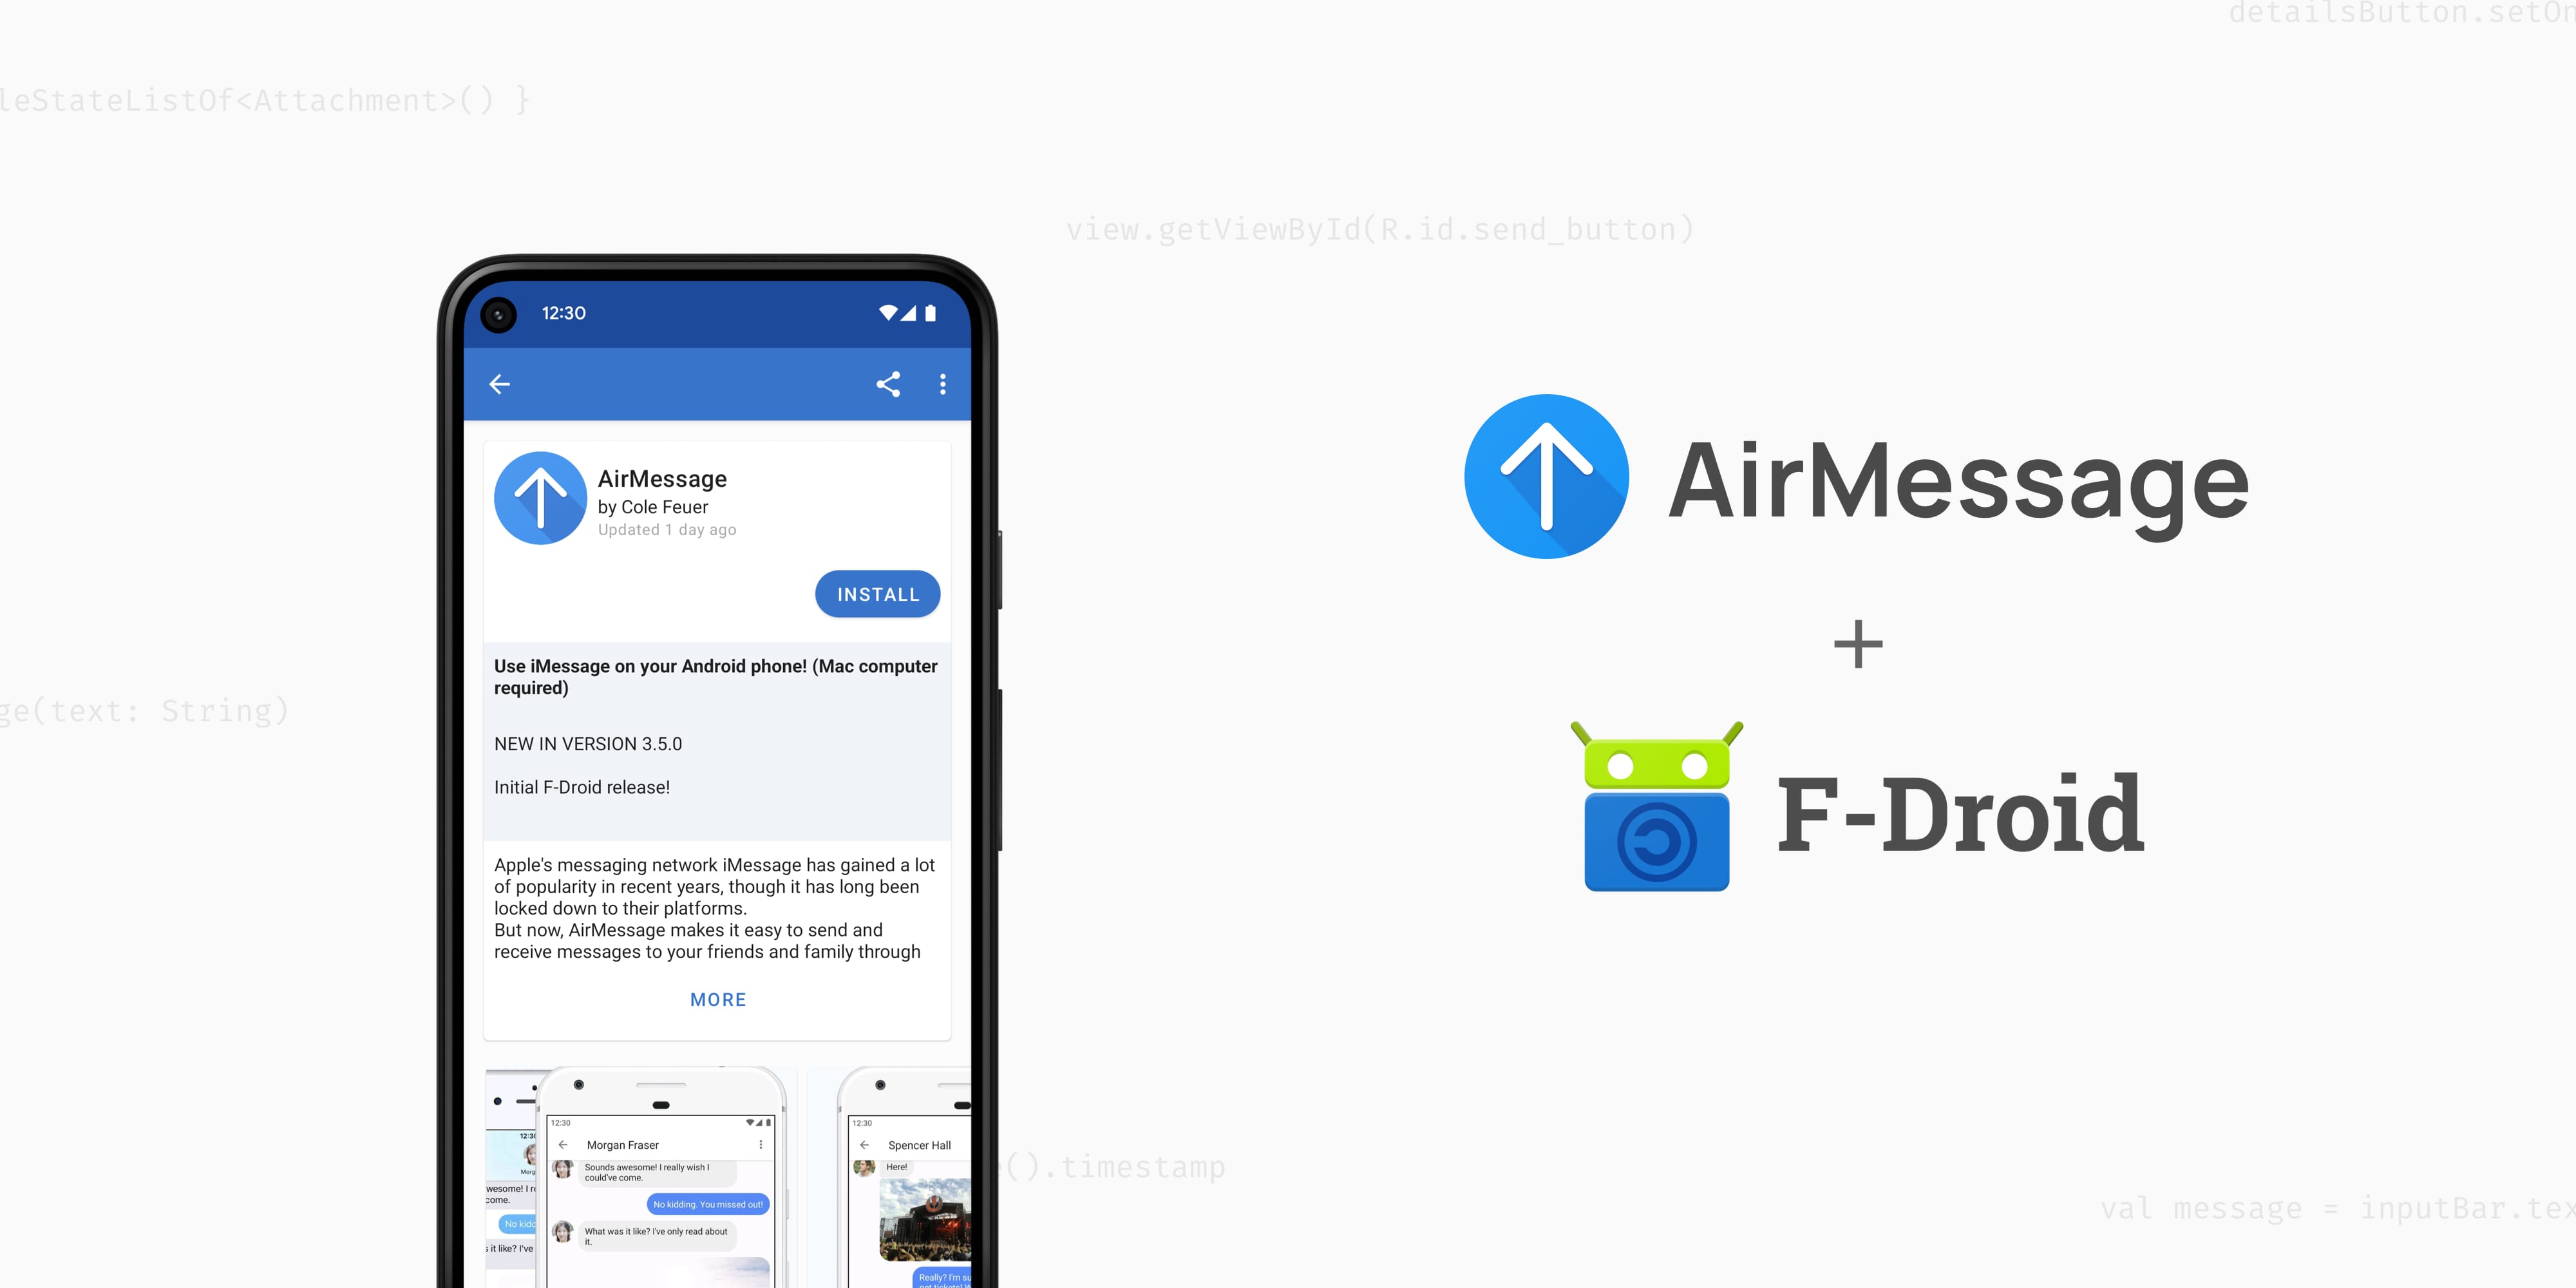 AirMessage's store listing on F-Droid